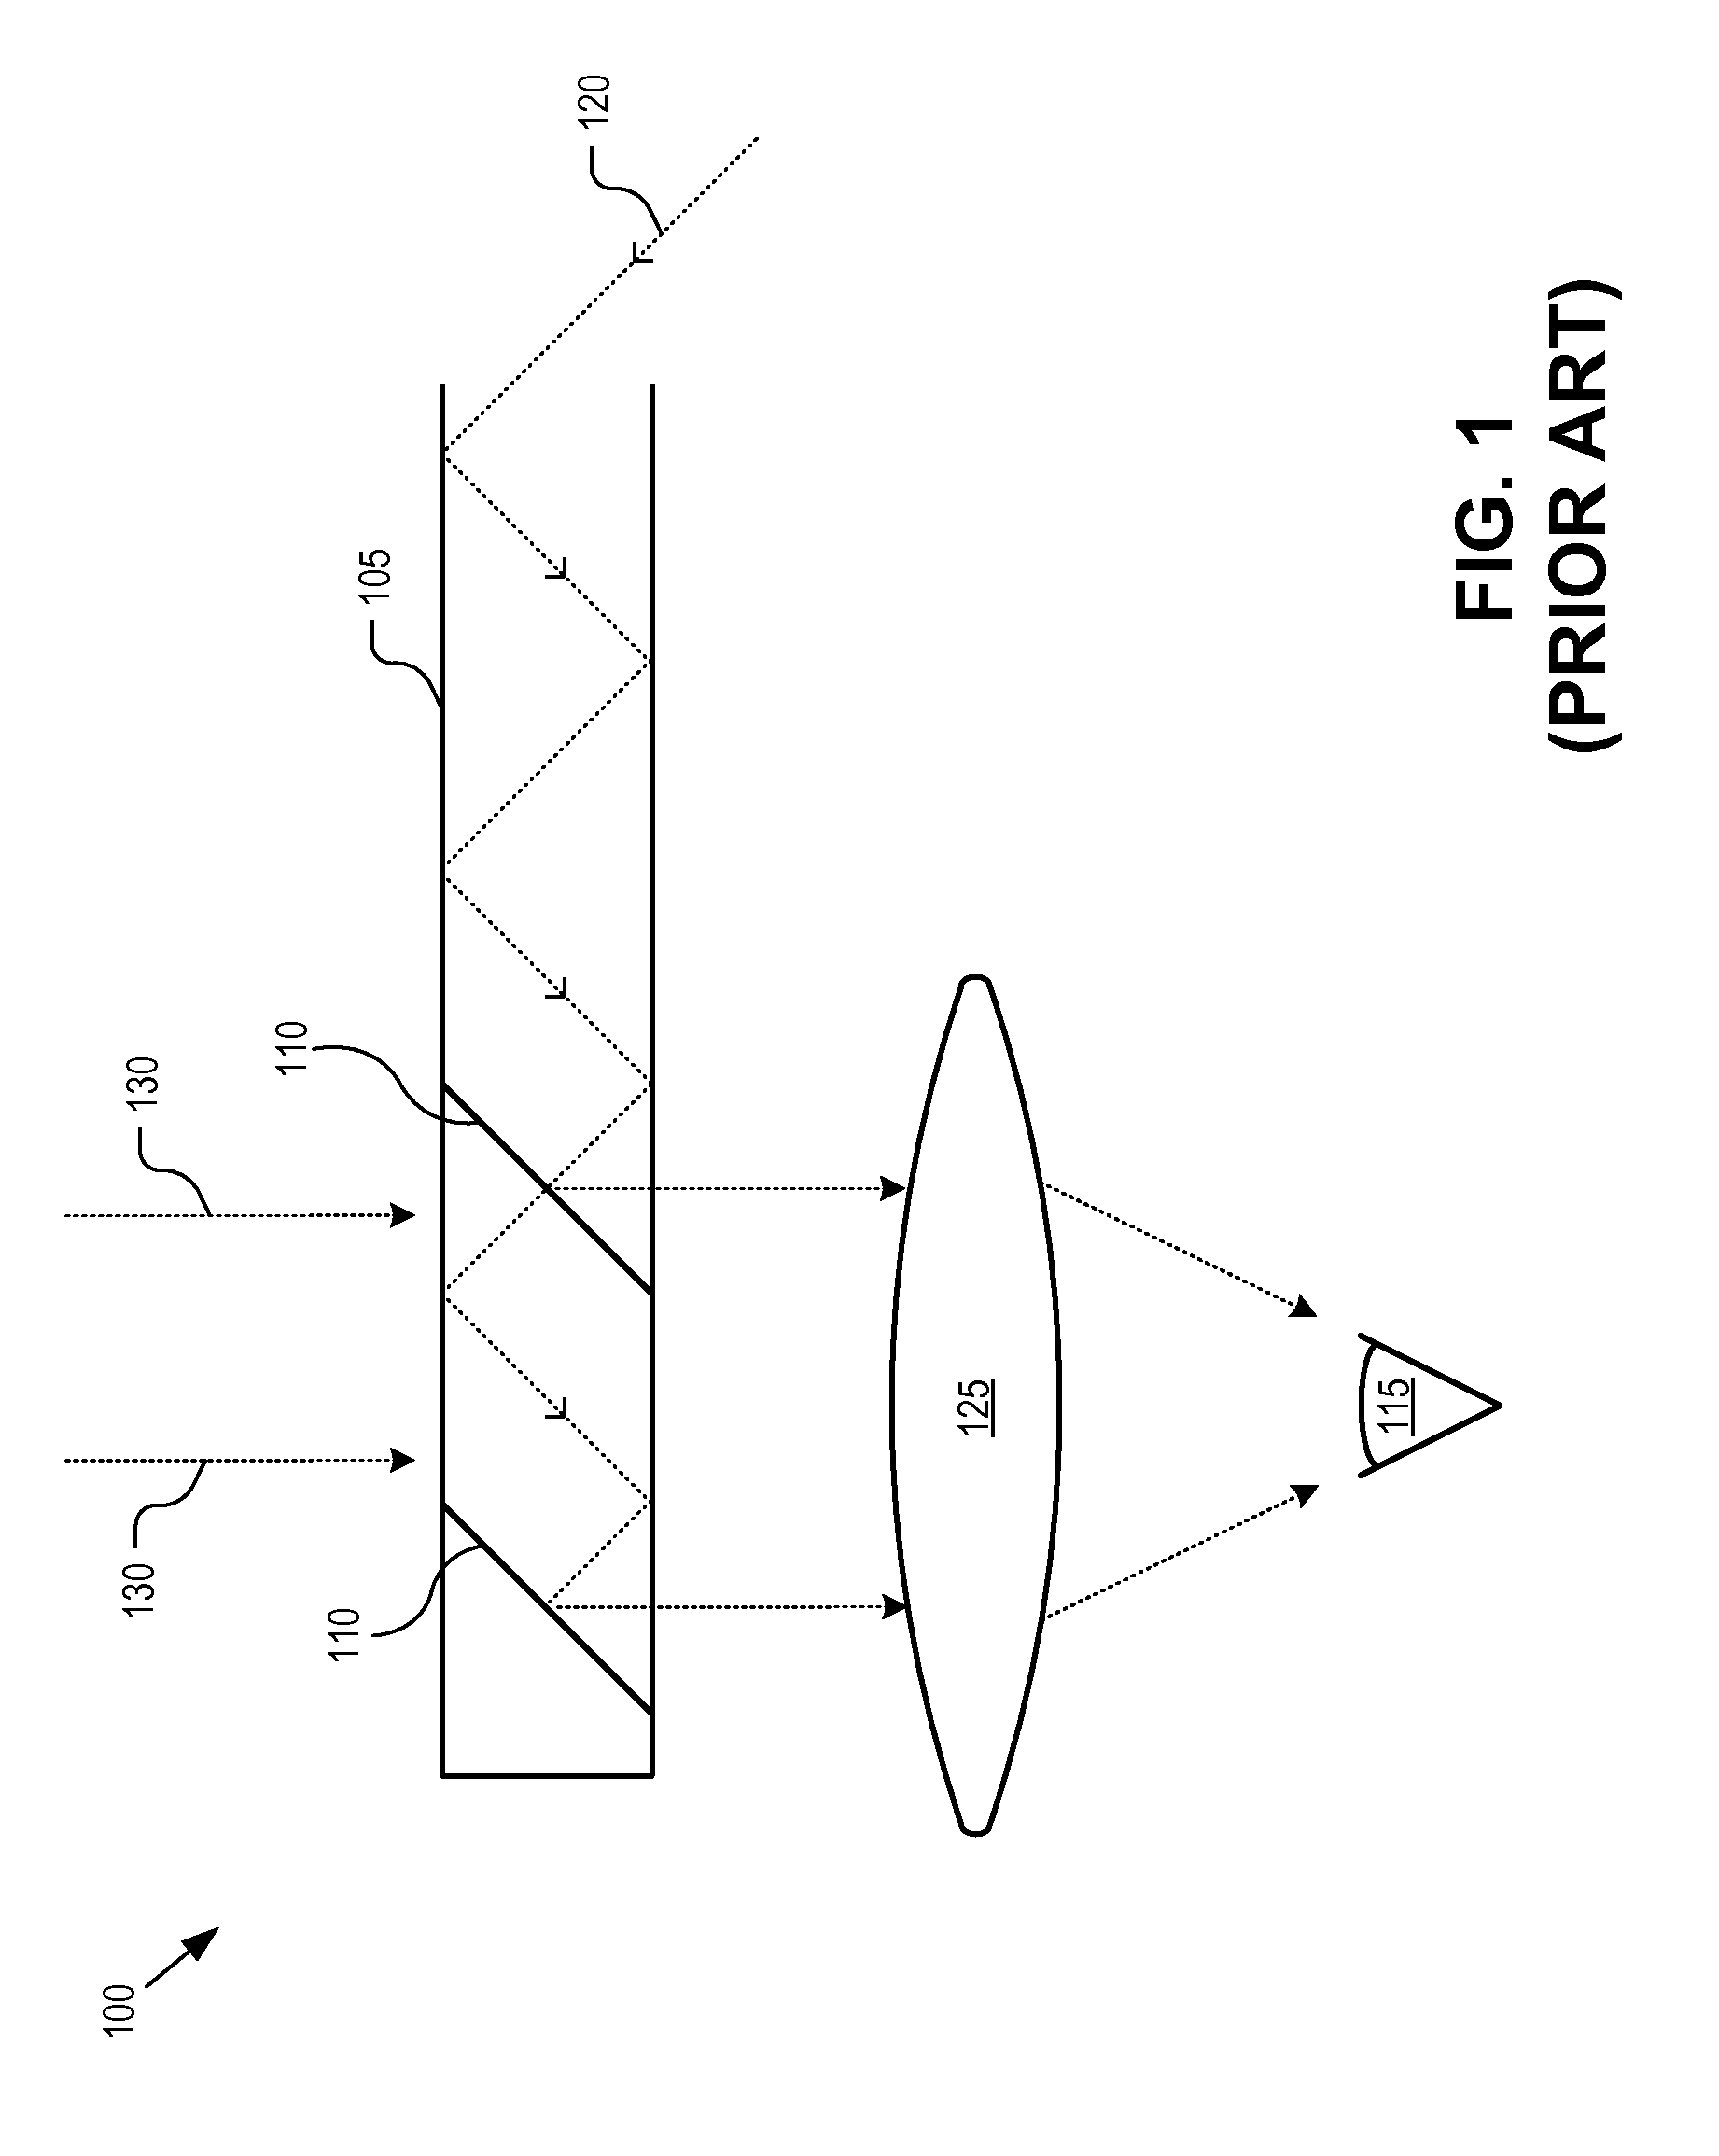 Near-to-eye display with diffractive lens